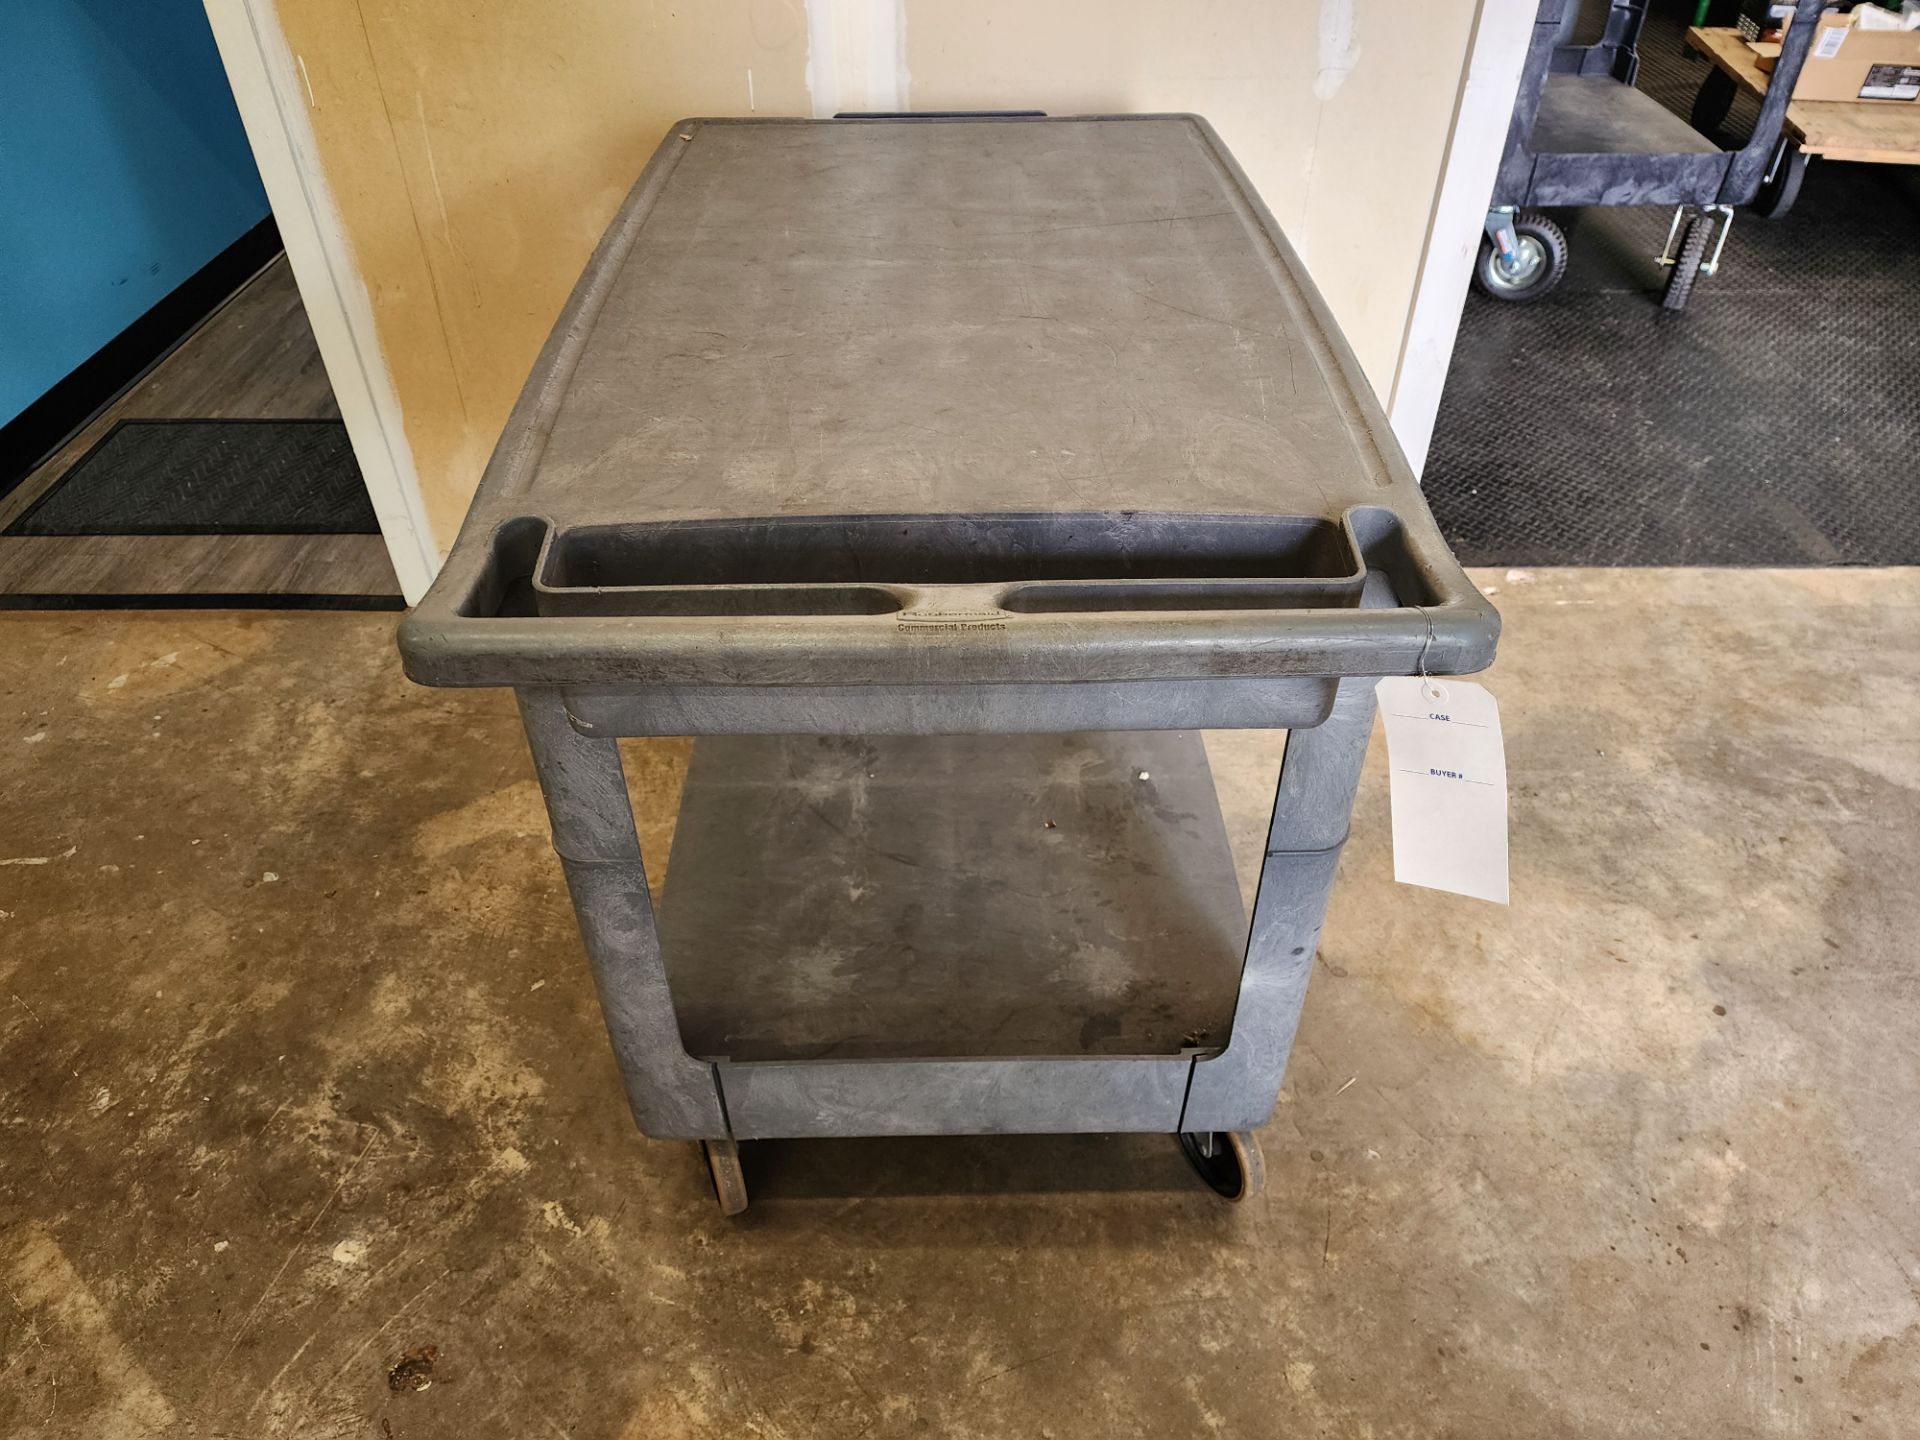 Gray Rubbermaid Utility Cart, 2-Tier, 25"x36" - Image 2 of 3